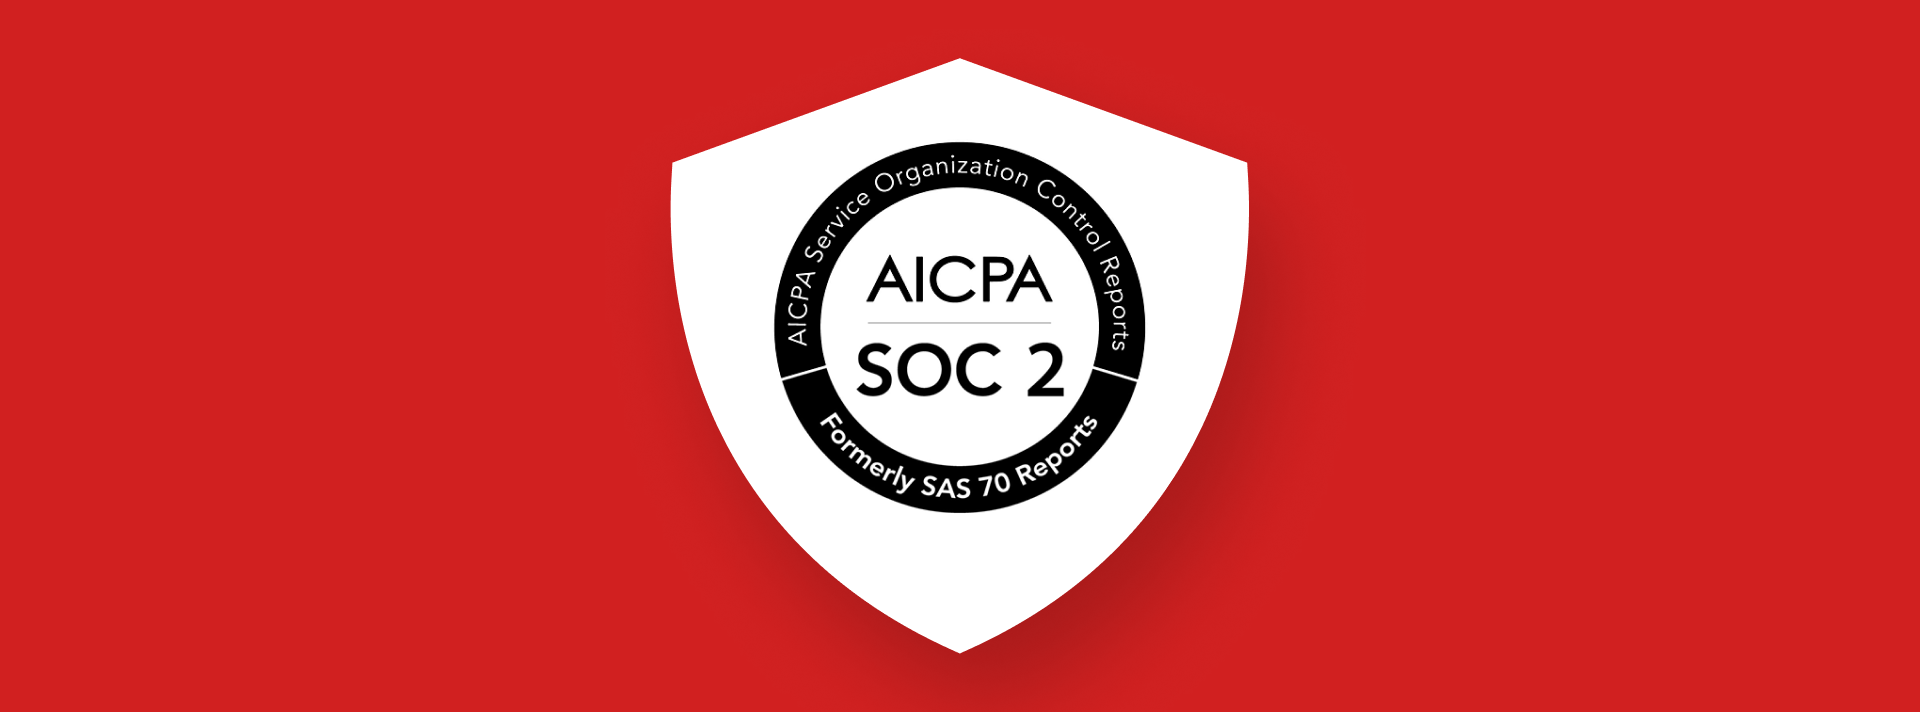 Logo of the SOC 2 certification